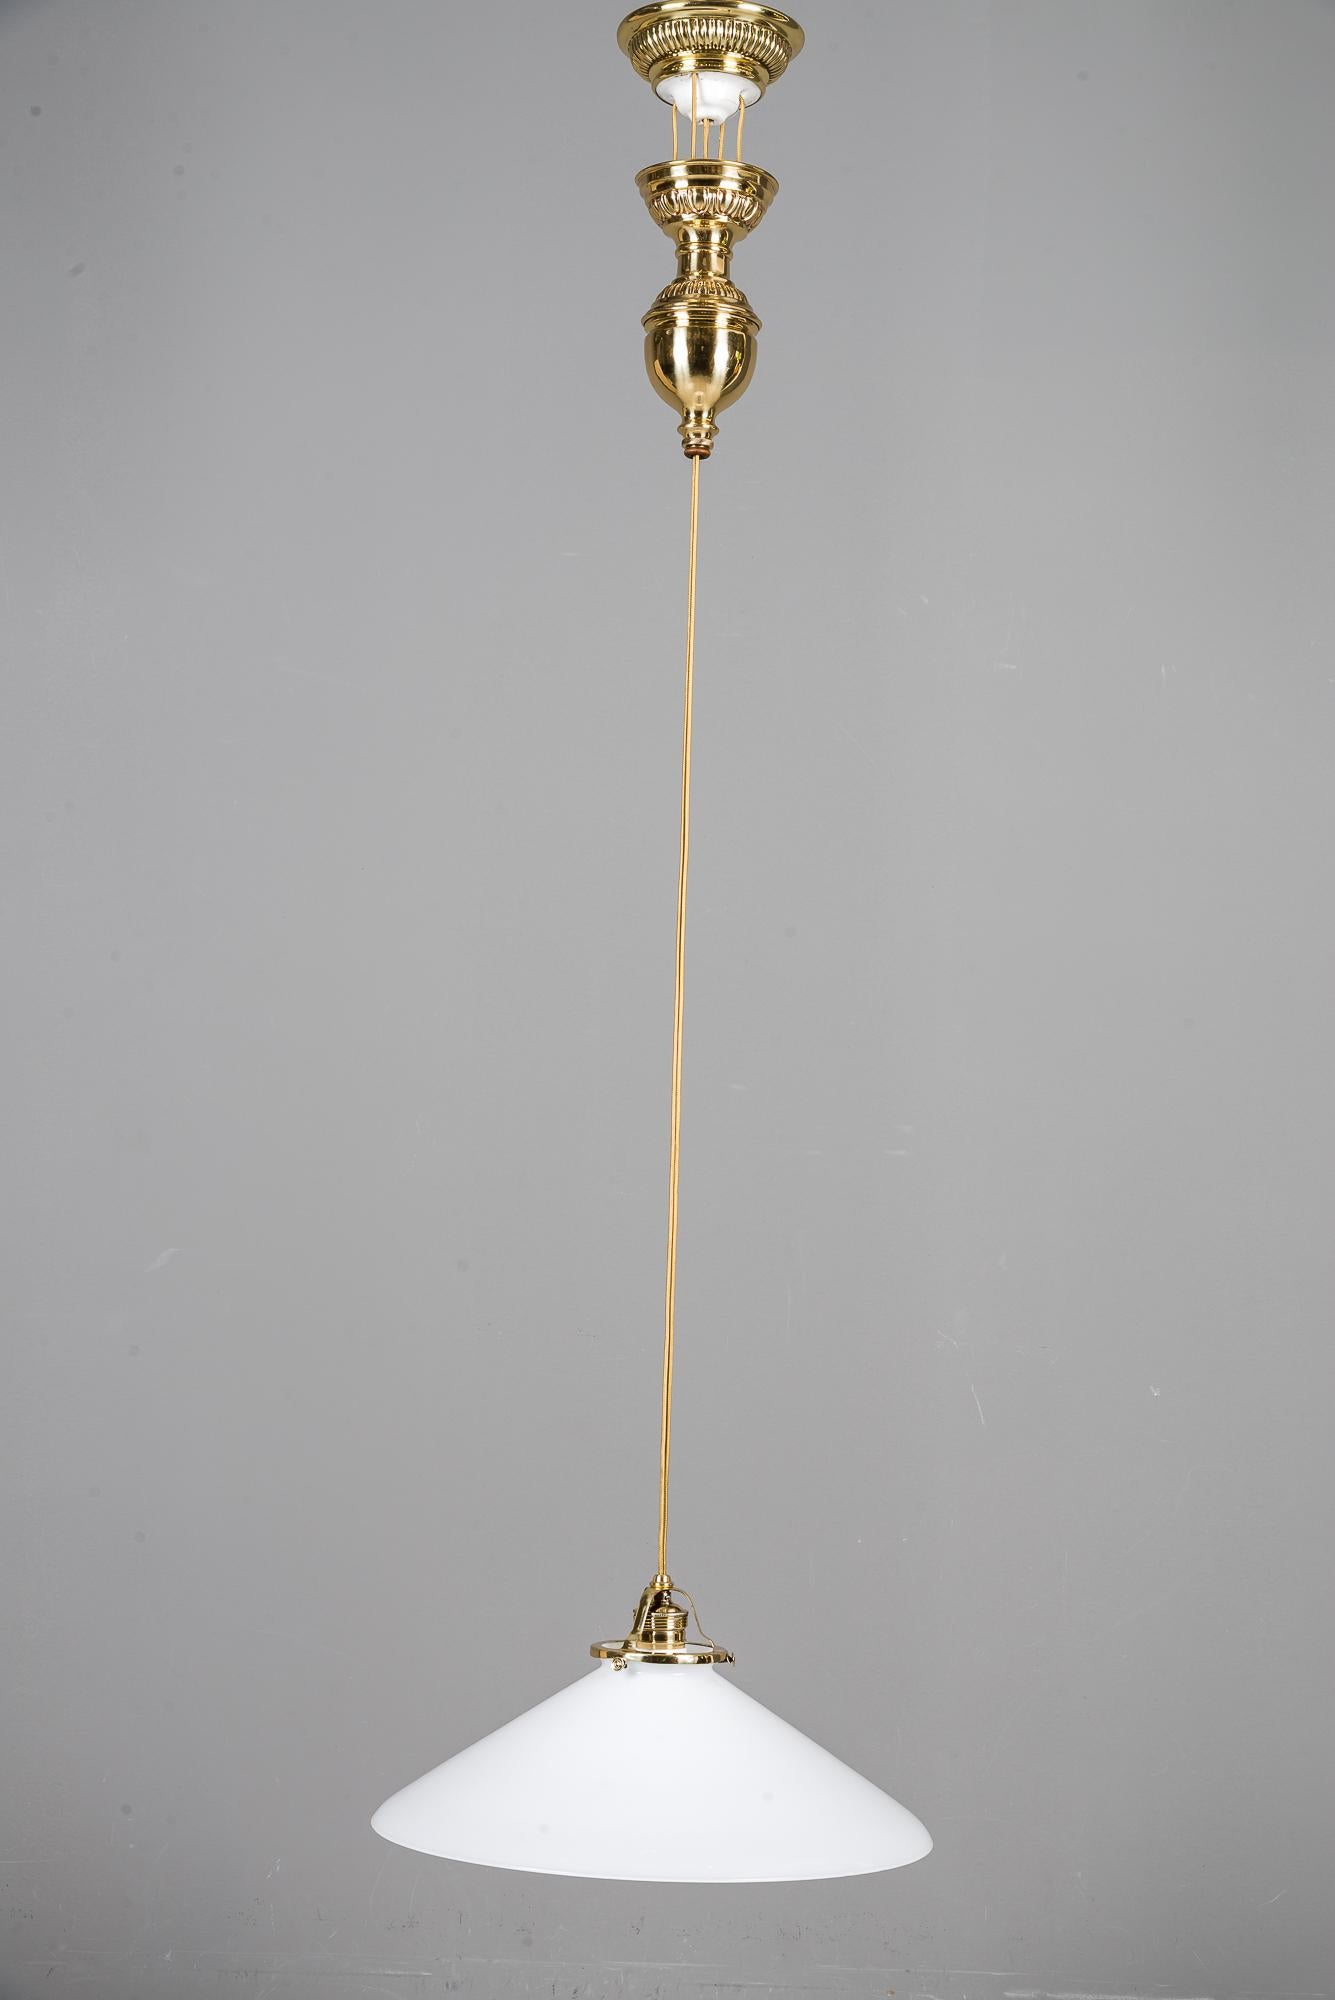 Adjustable Jugendstil pendant, Vienna, around 1908
Brass parts polished and stove enamelled
New wire
Opal glass shade.